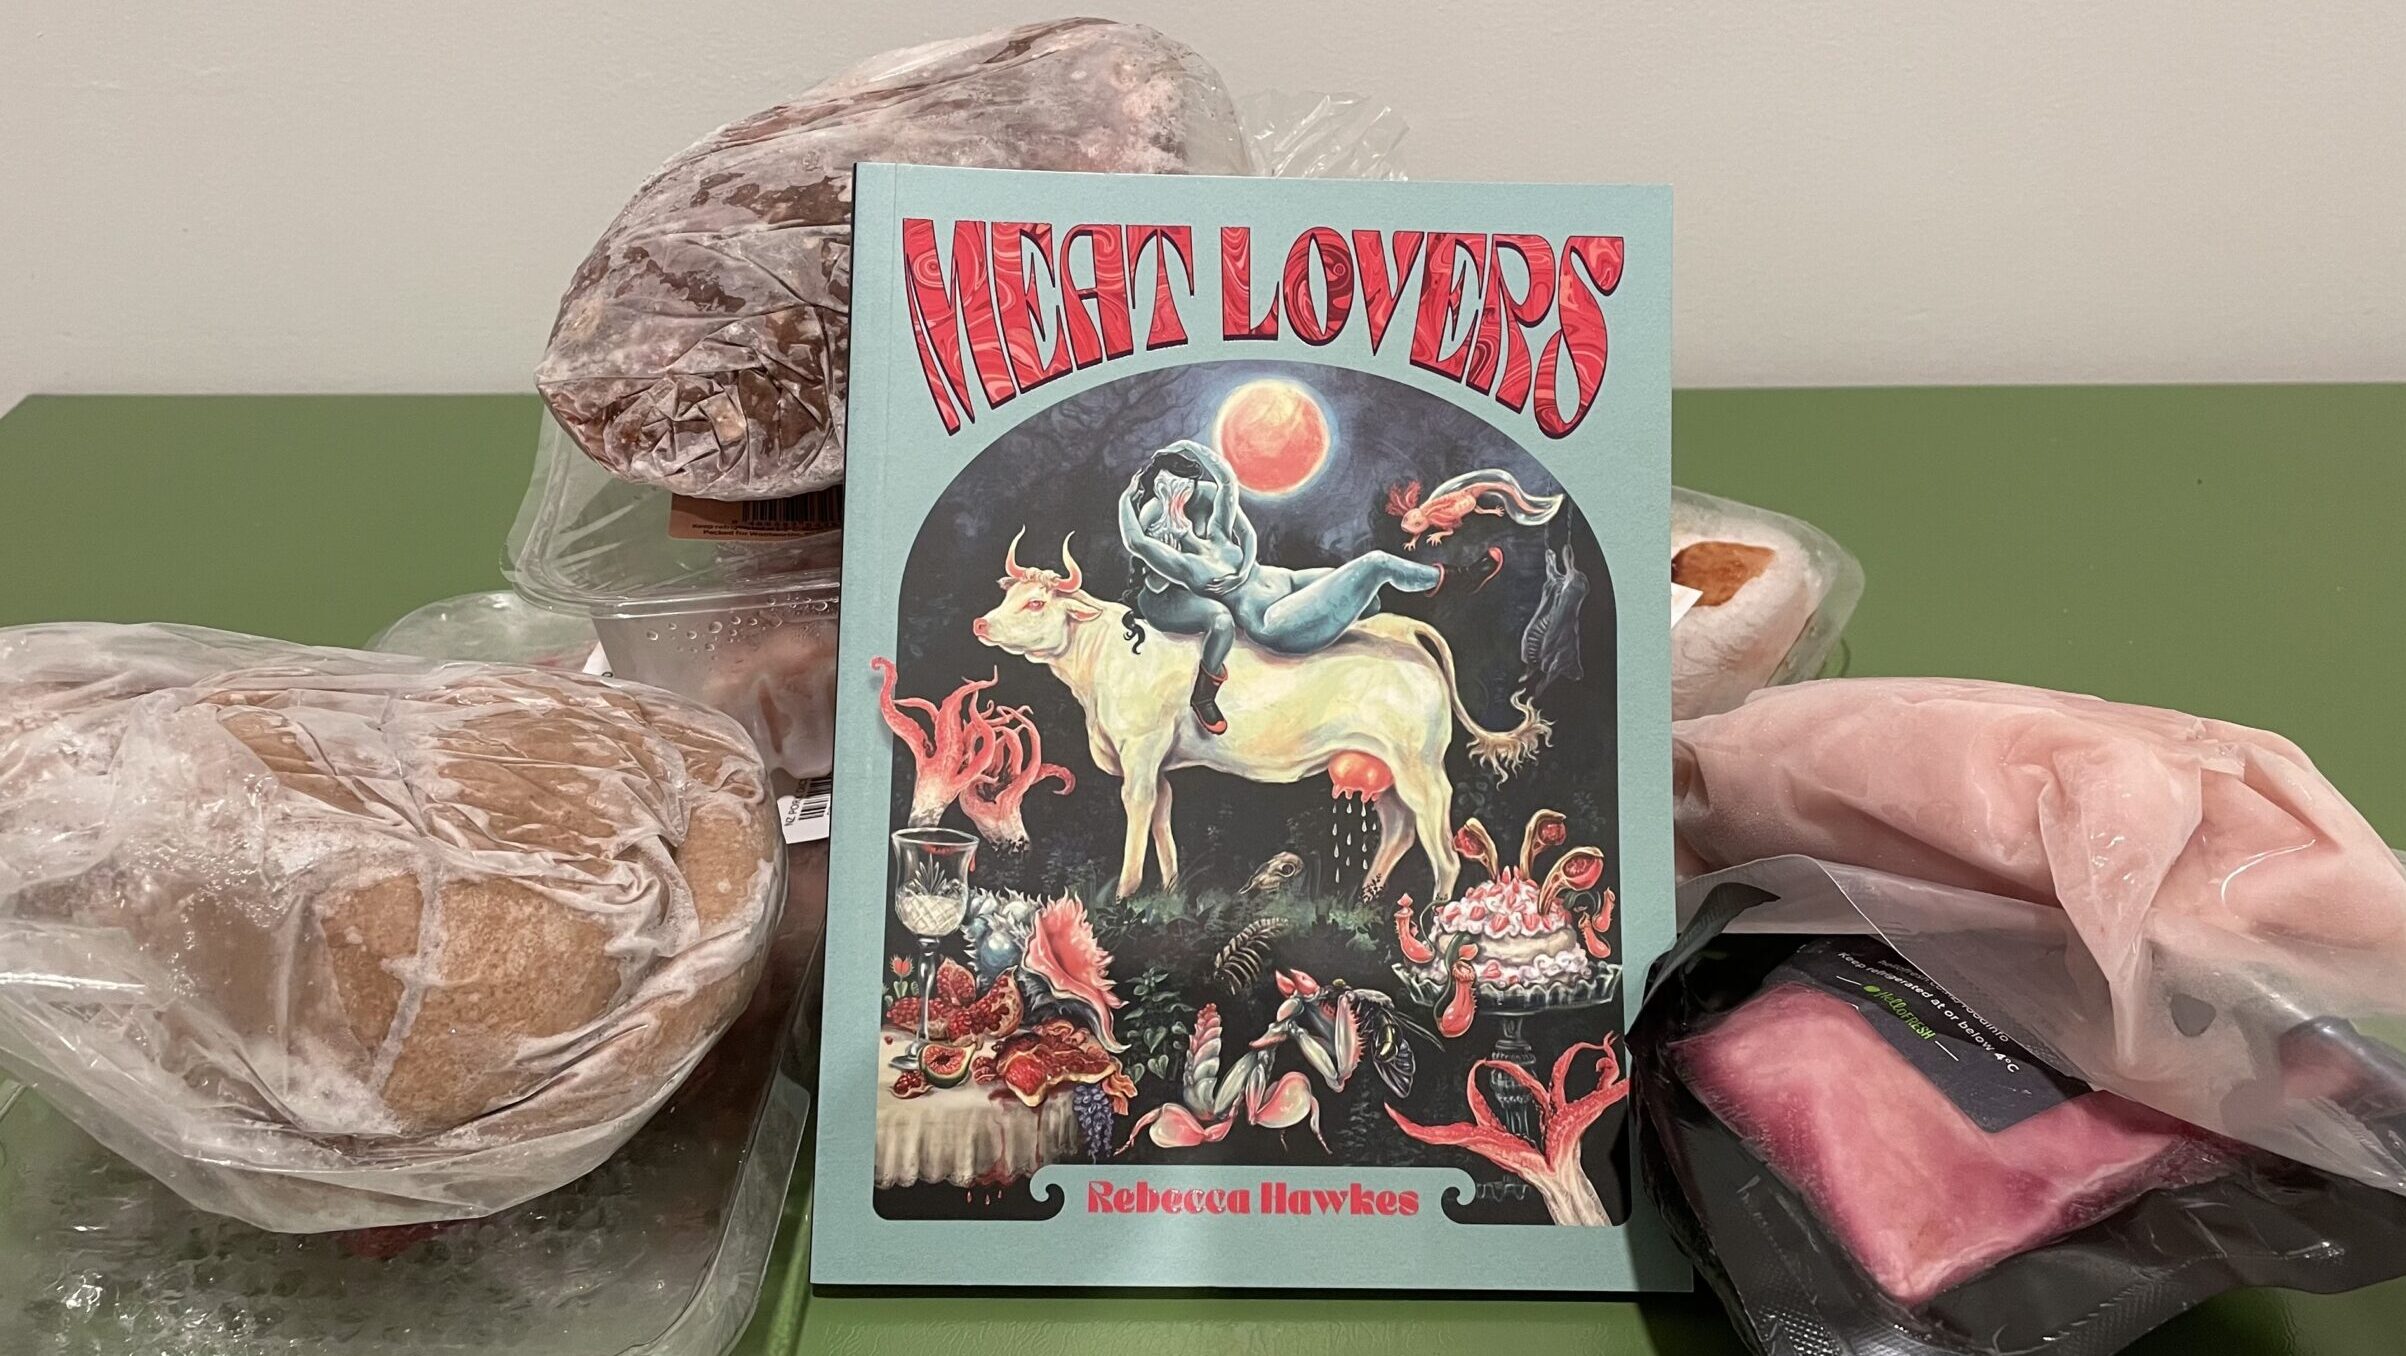 The book "Meat Lovers" by Rebecca Hawkes is propped up against a pile of frozen meat.